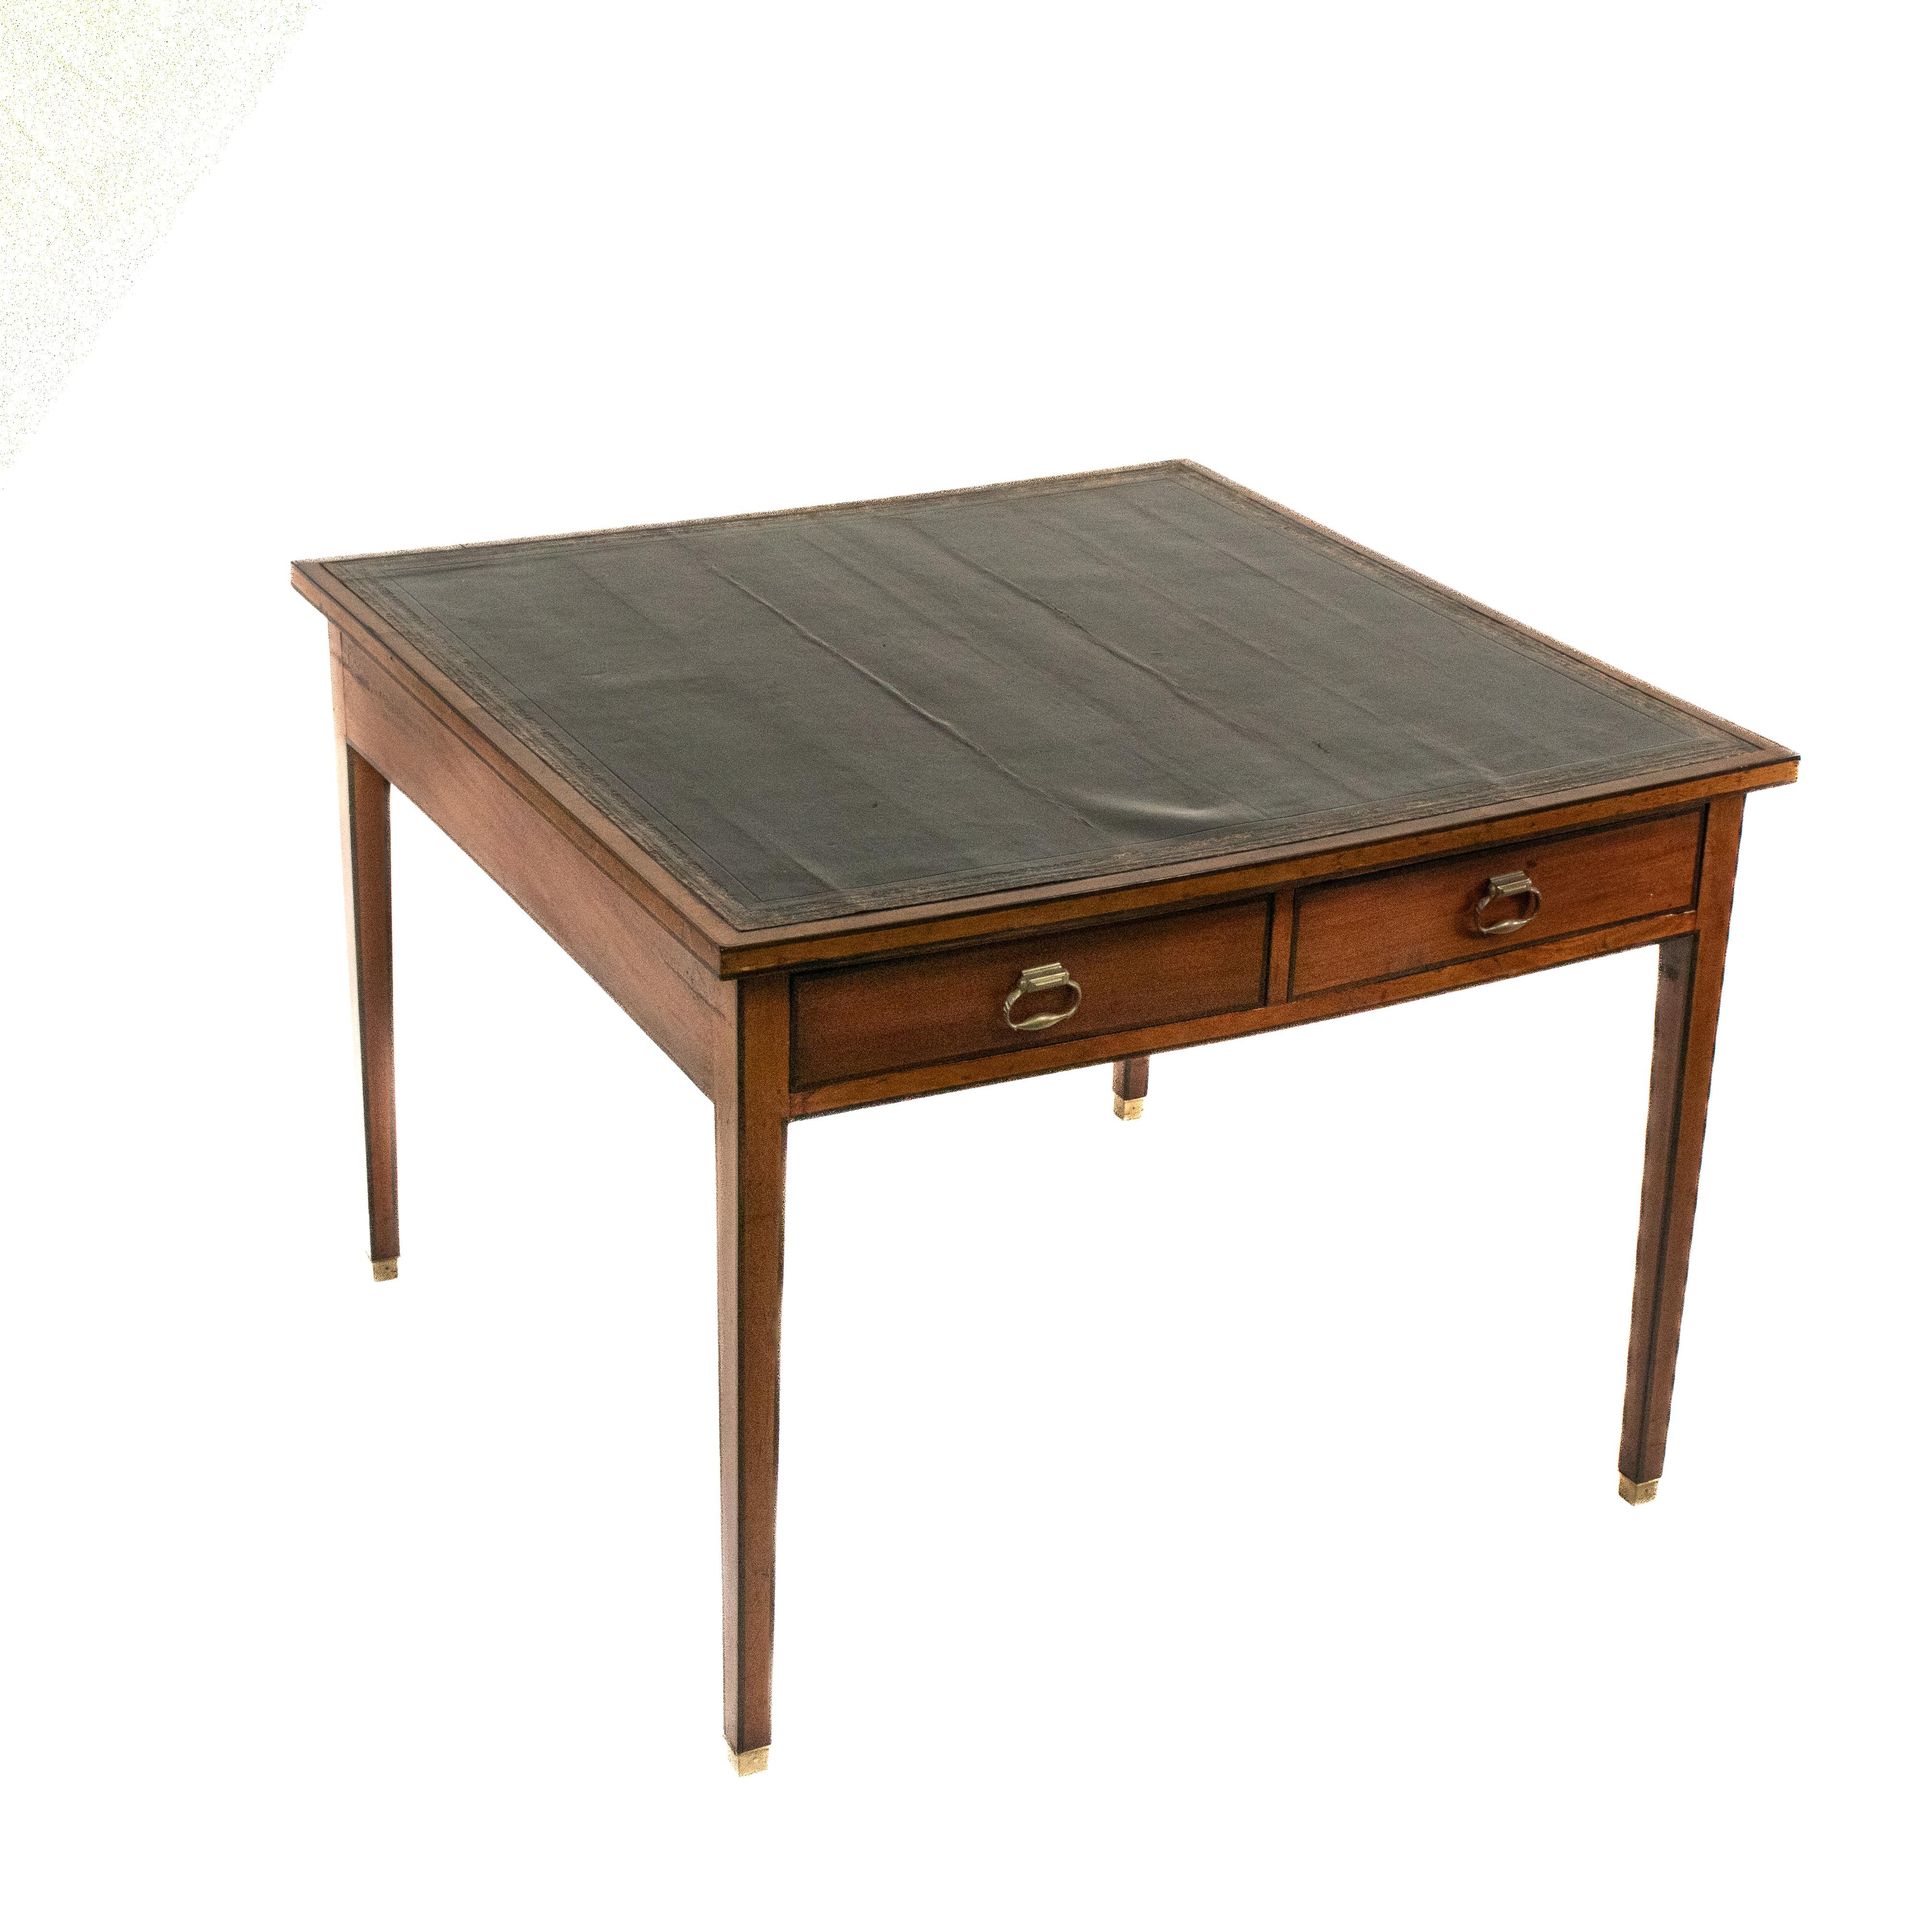 This George III table has gold embossed trim around a beautifully weathered dark green-blue leather tabletop. The square body has been made entirely from mahogany with a mahogany veneer. It has a cross-banded mahogany edge around the leather top.